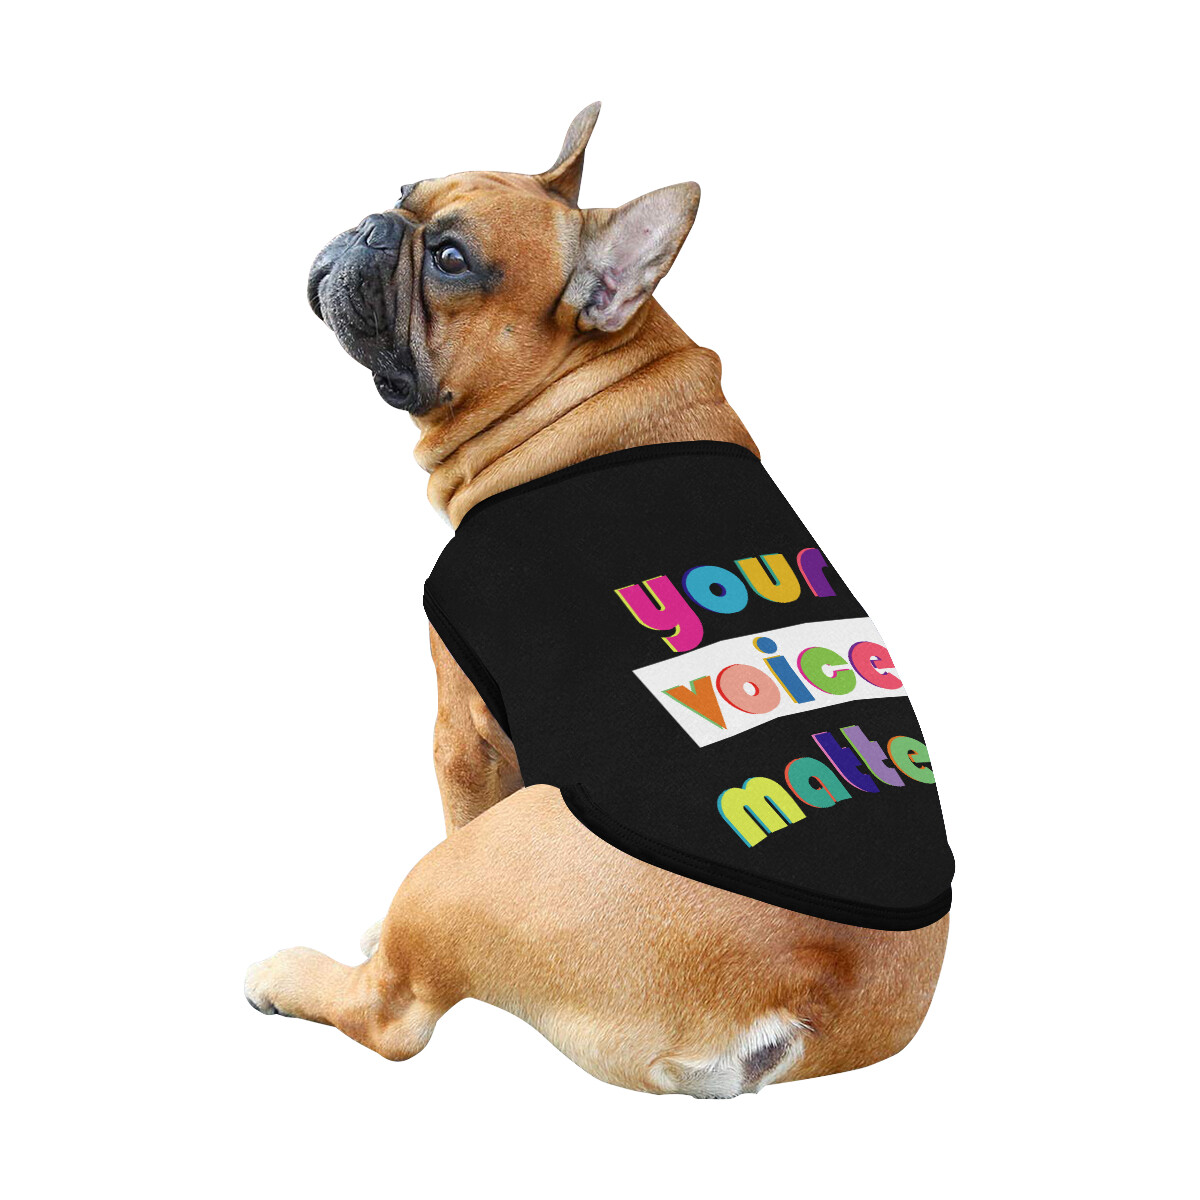 🐕 Your voice matters Dog shirt, Dog Tank Top, Dog t-shirt, Dog clothes, Gifts, front back print, 7 sizes XS to 3XL, dog gifts, black